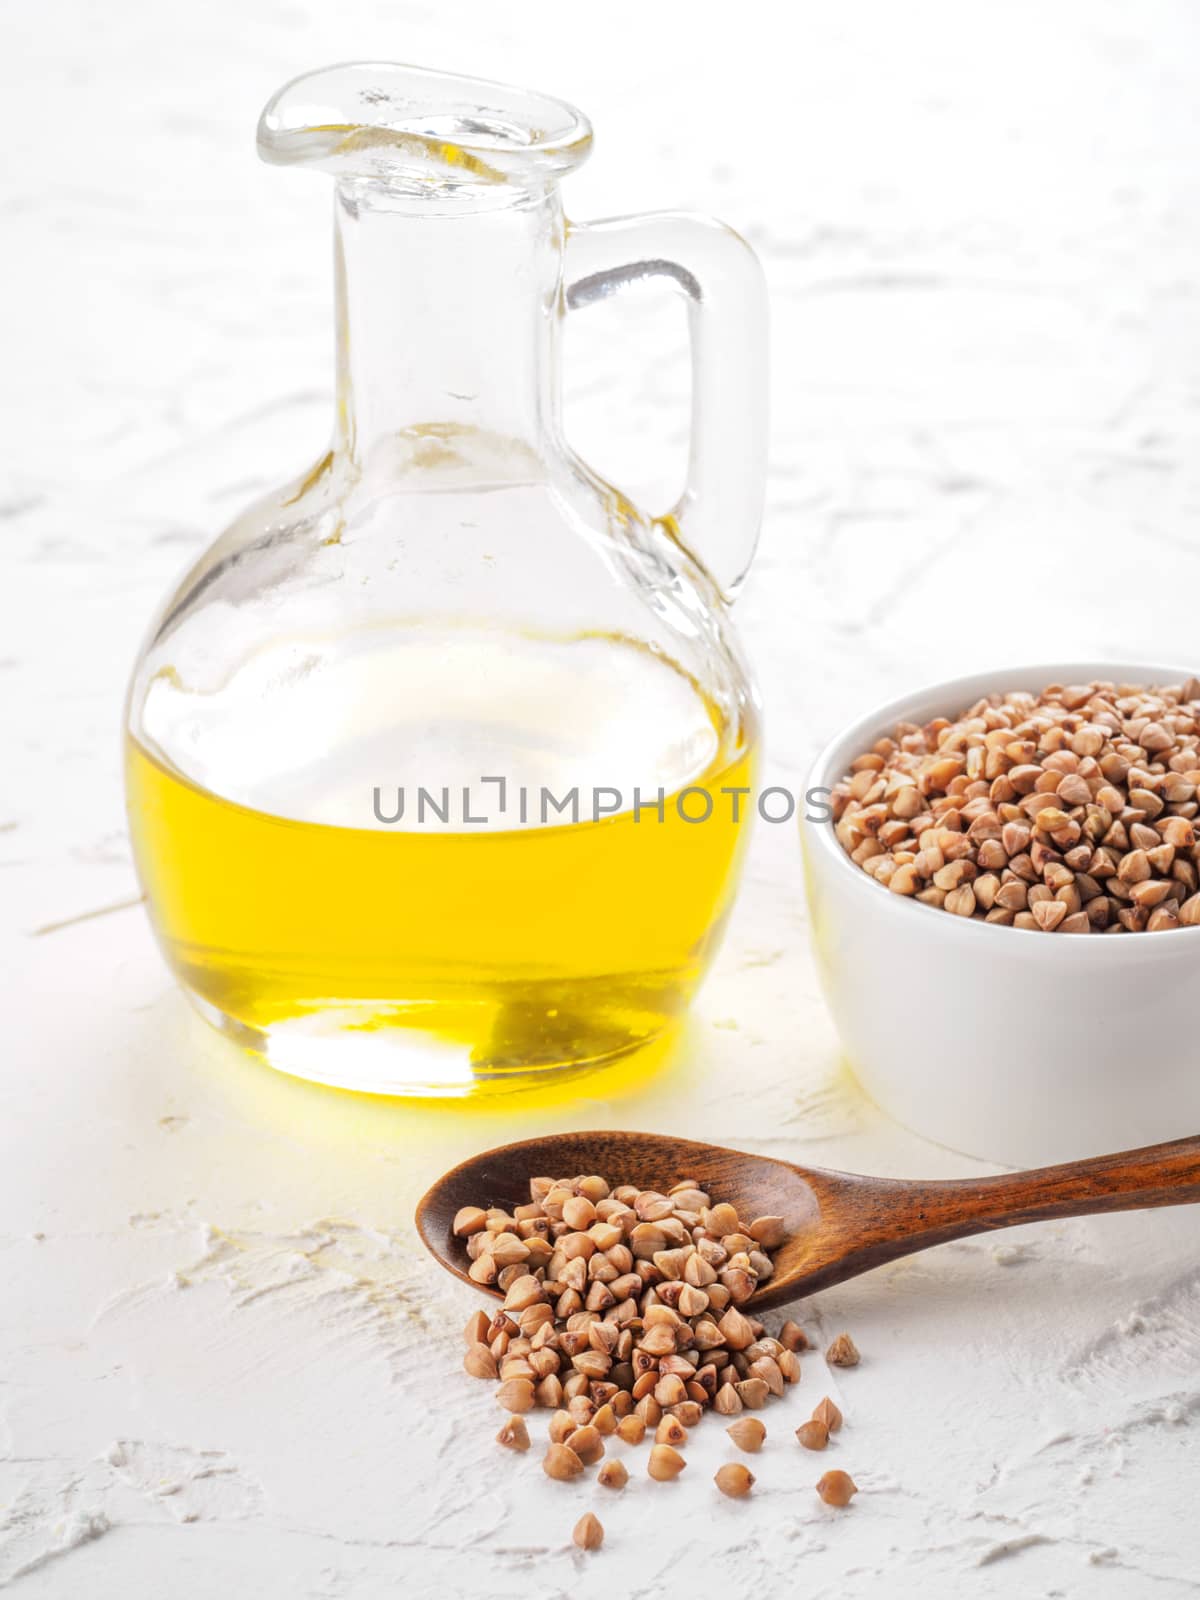 Brown buckwheat in spoon and buckwheat oil in glass bottle on white wooden background. Copy space.